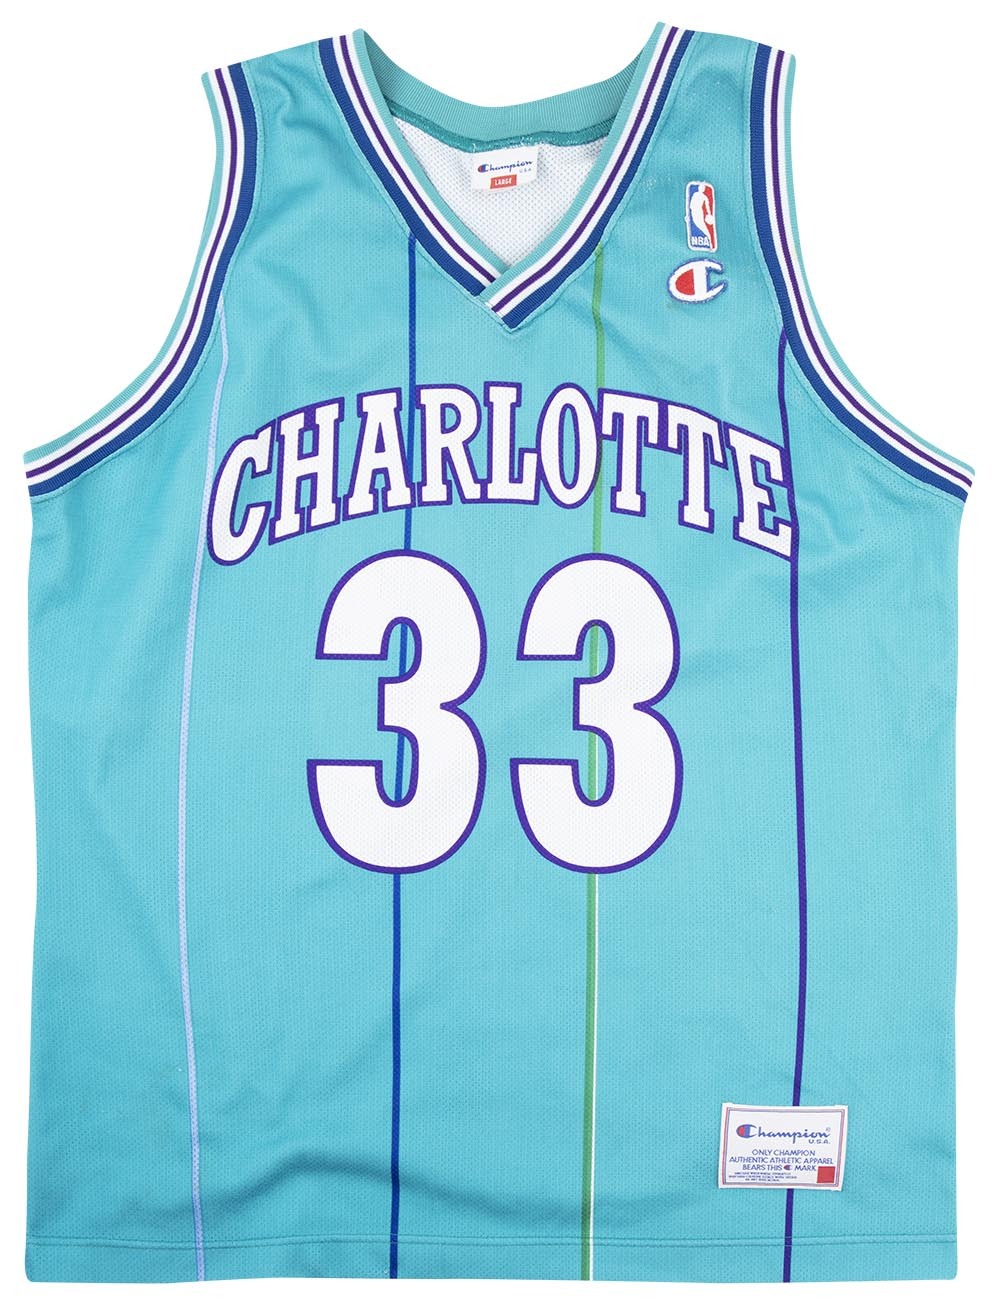 1992-95 Charlotte Hornets Mourning #33 Champion Away Jersey (Excellent) XL